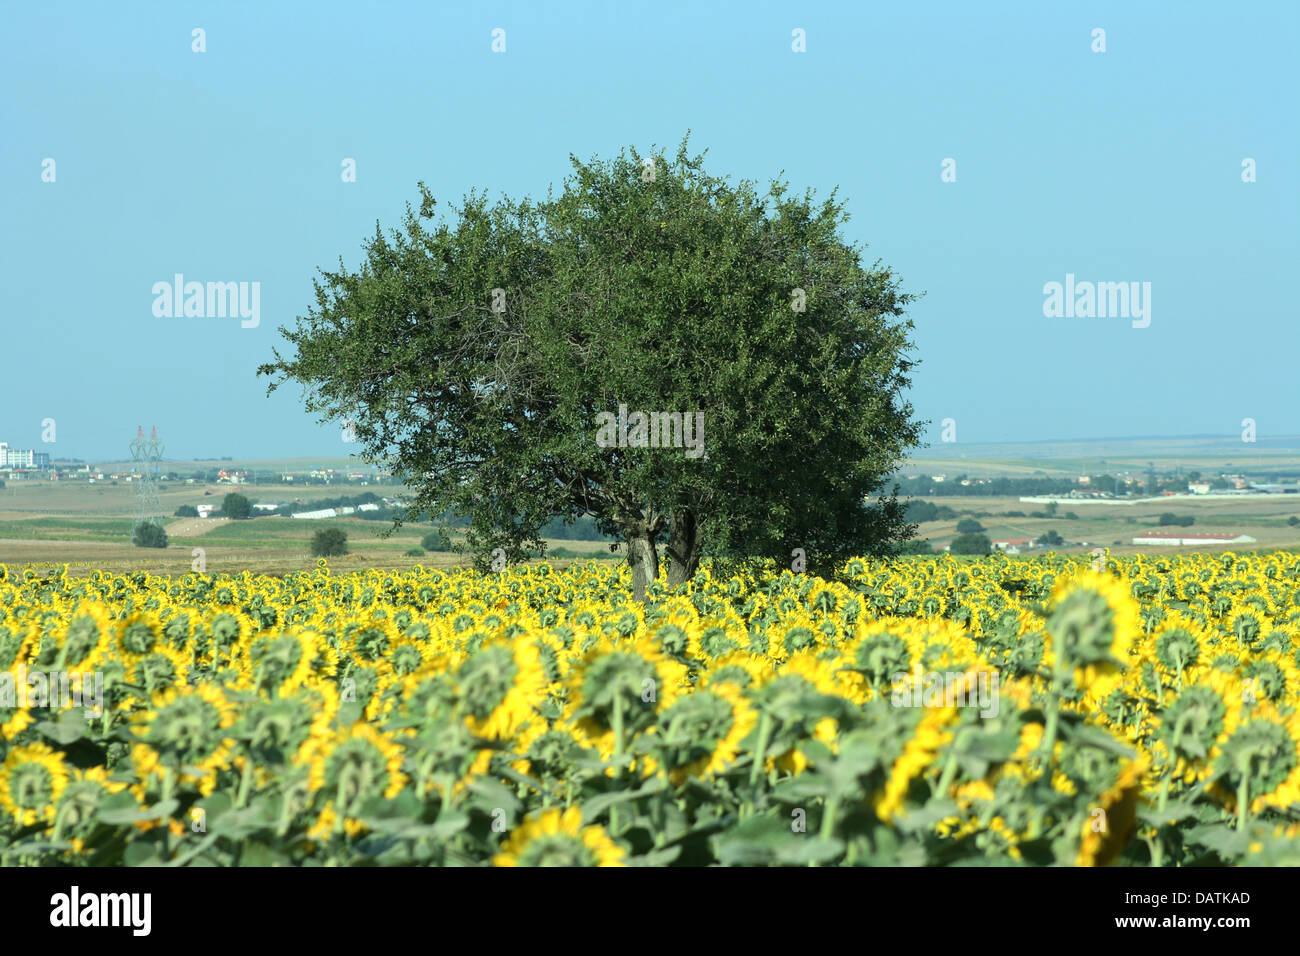 Lonely Tree in Sunflower Field Banque D'Images